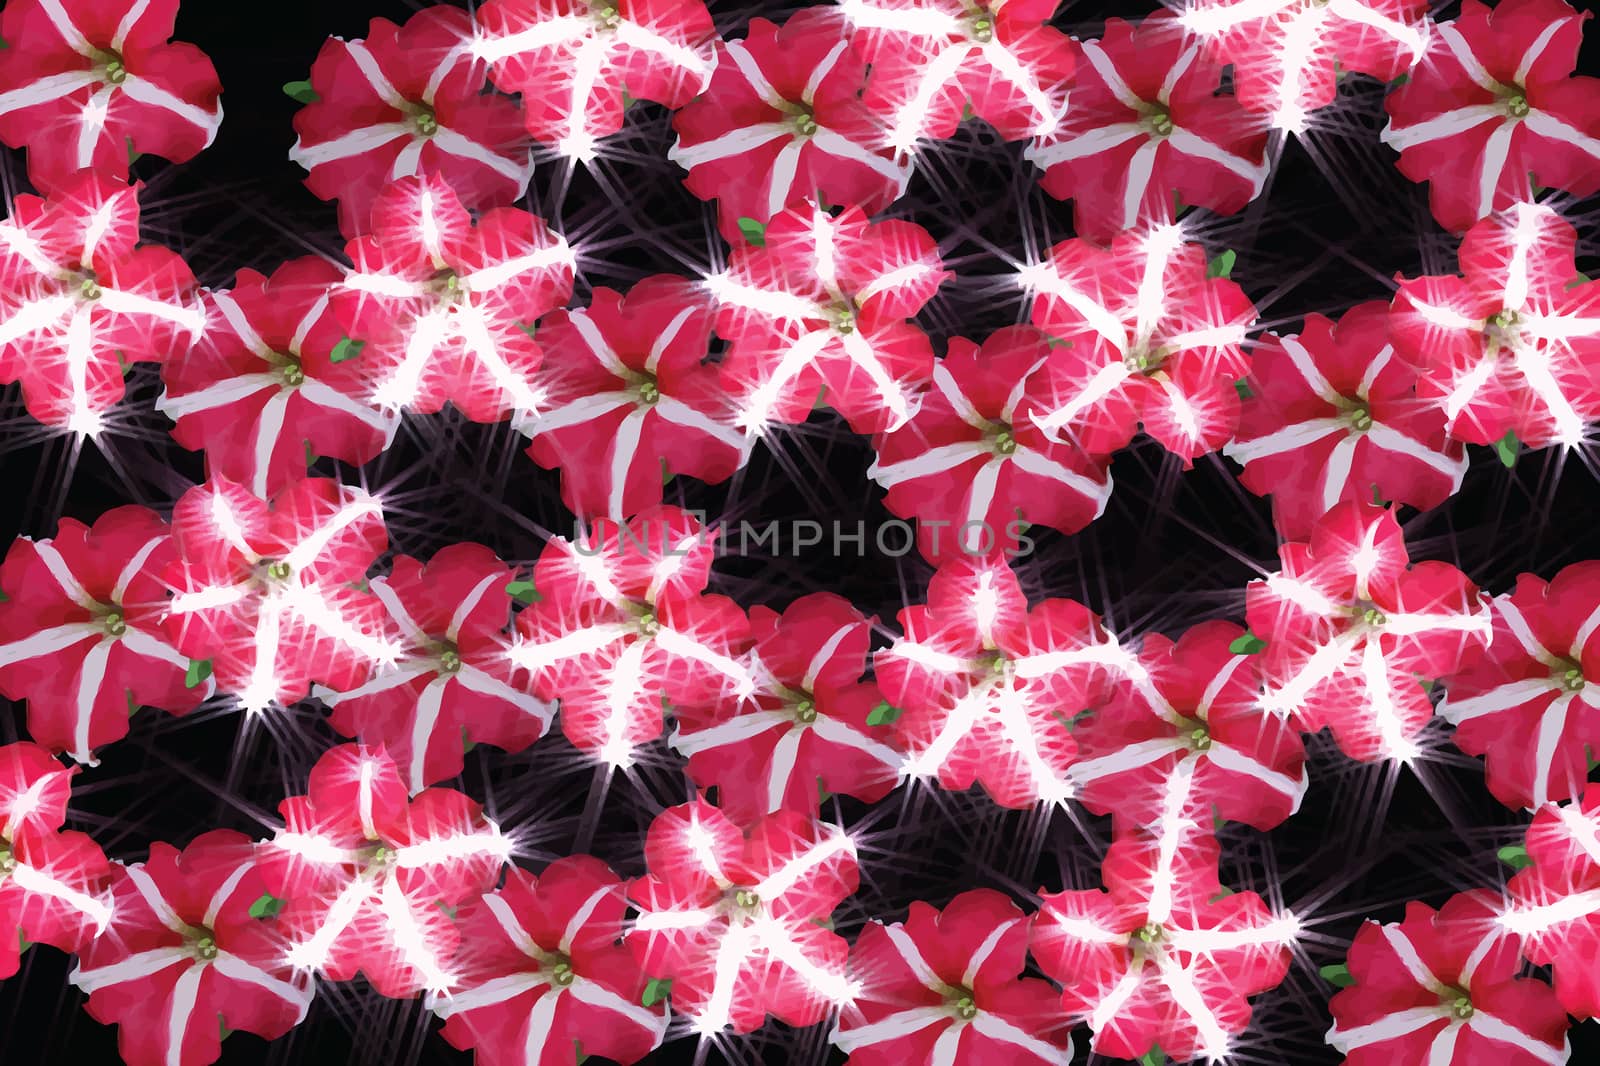 Floral background of the flowers of petunia pink with sparkling white stripes on the petals